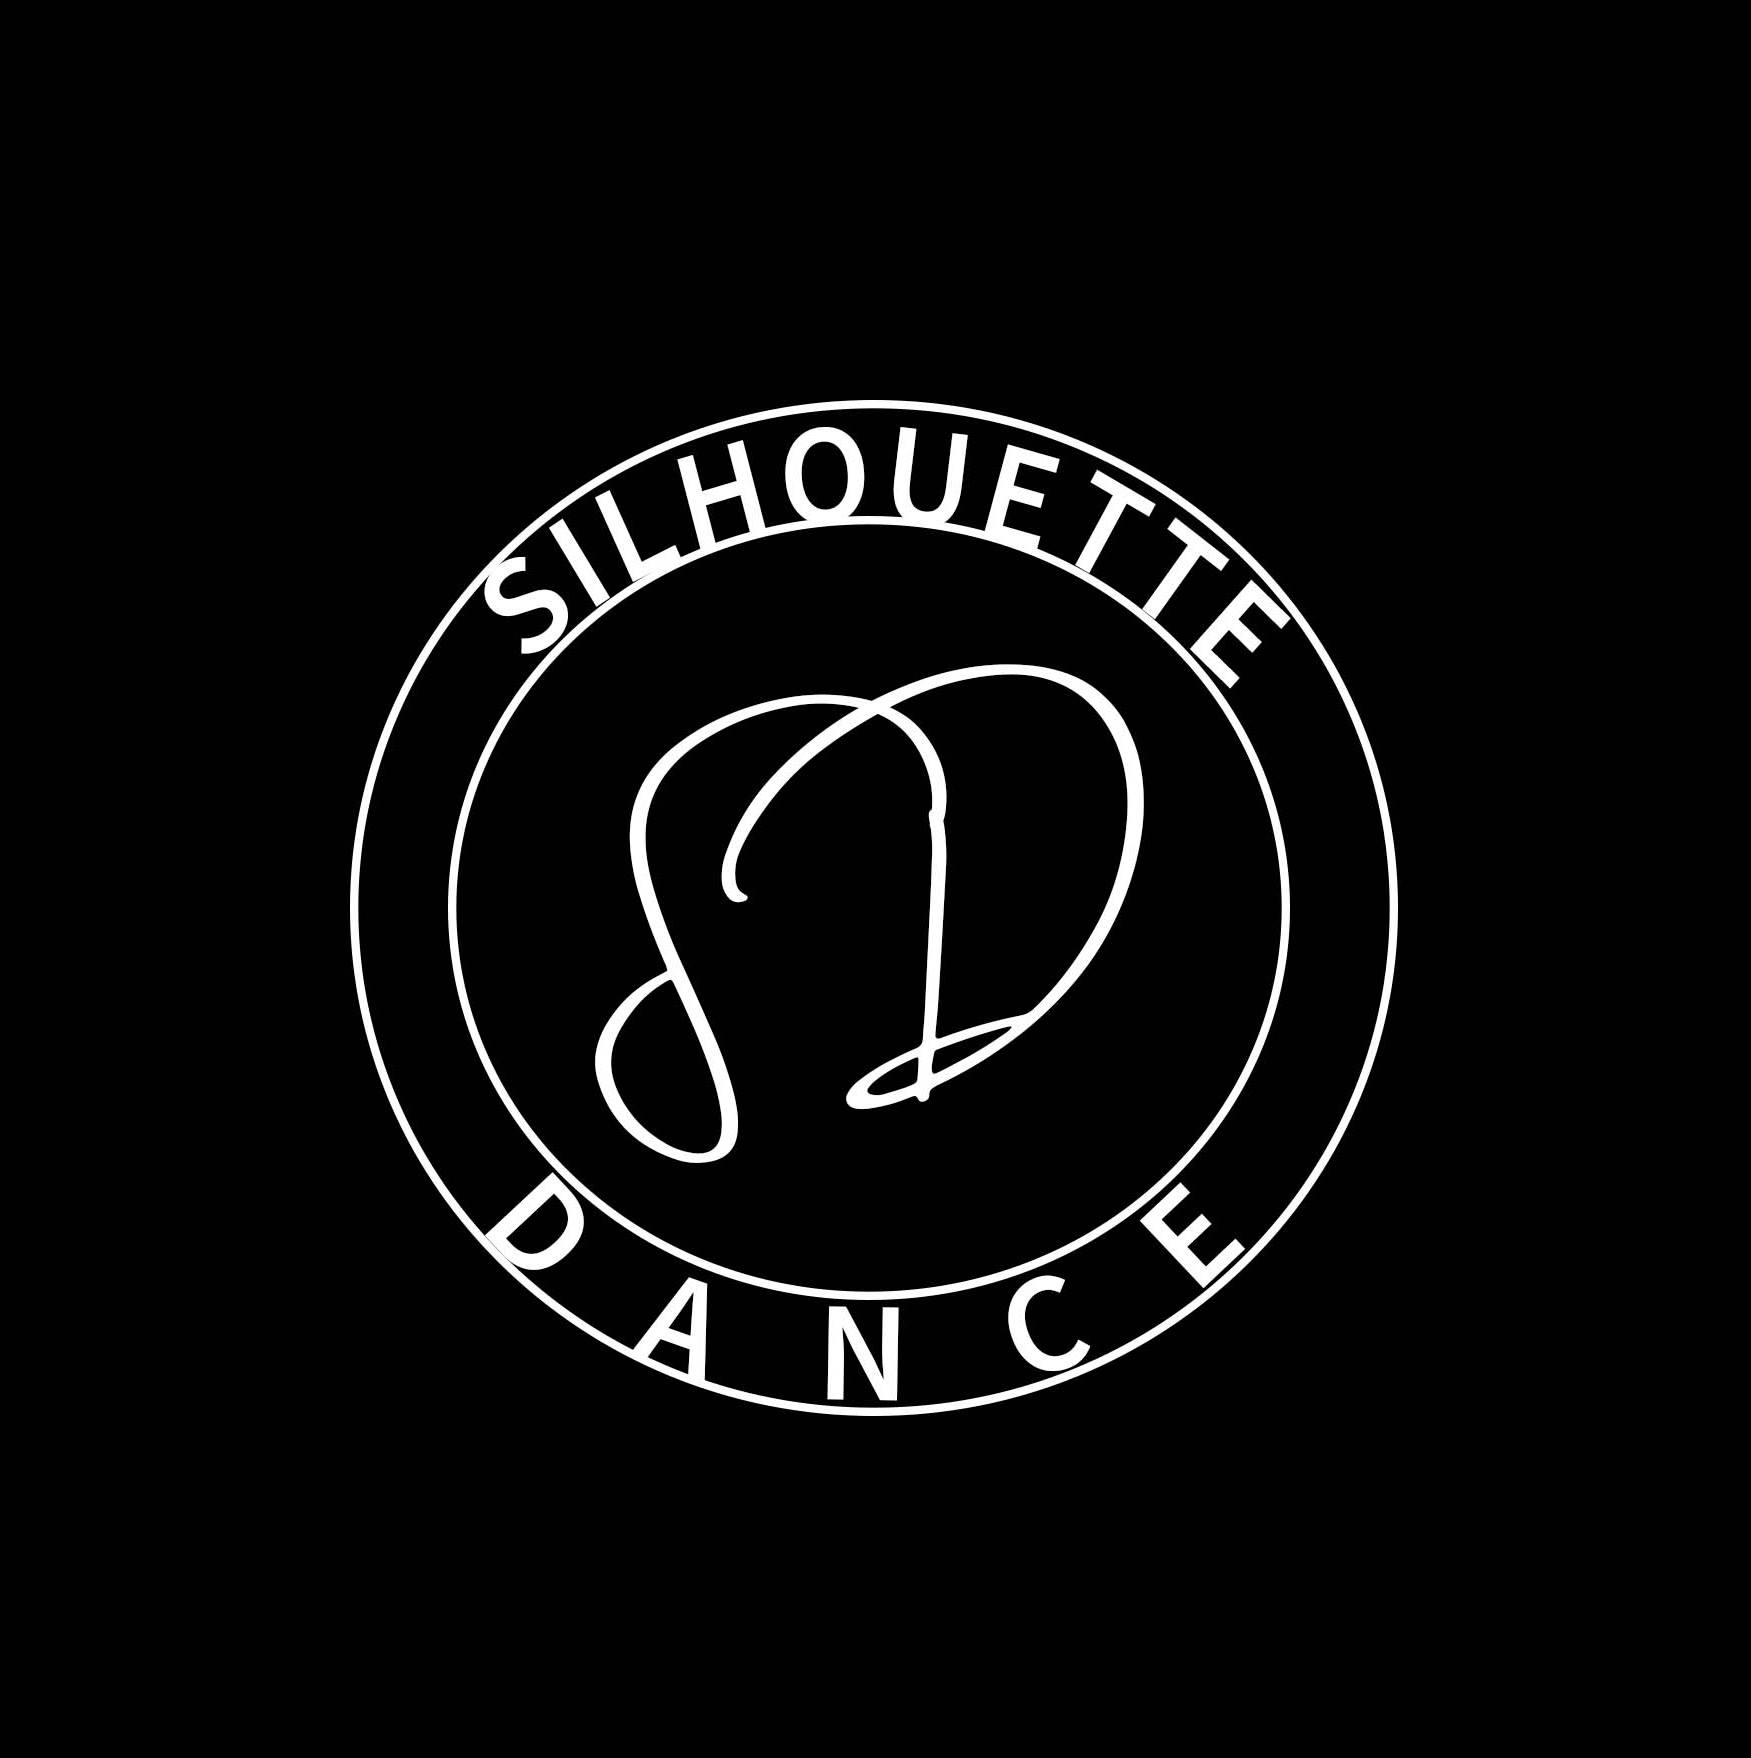 Take part in drama and performing arts Image for Silhouette Dance